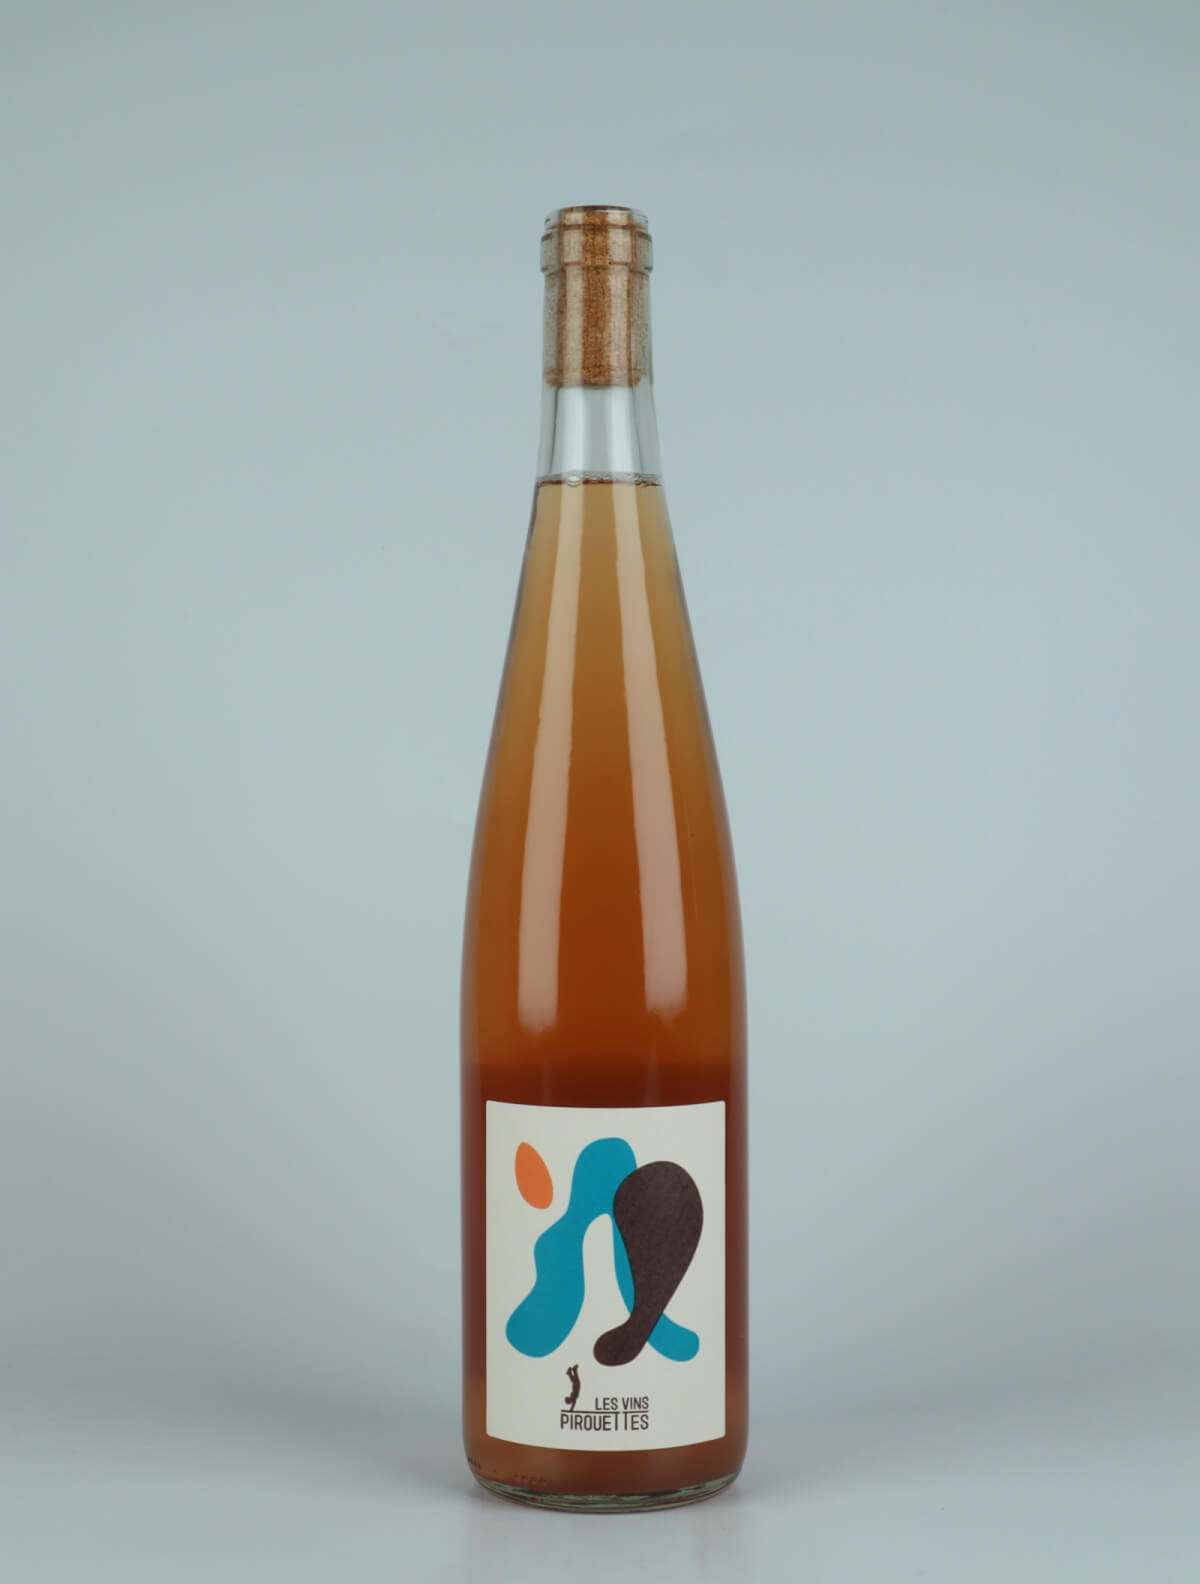 A bottle 2022 Eros Orange wine from Les Vins Pirouettes, Alsace in France